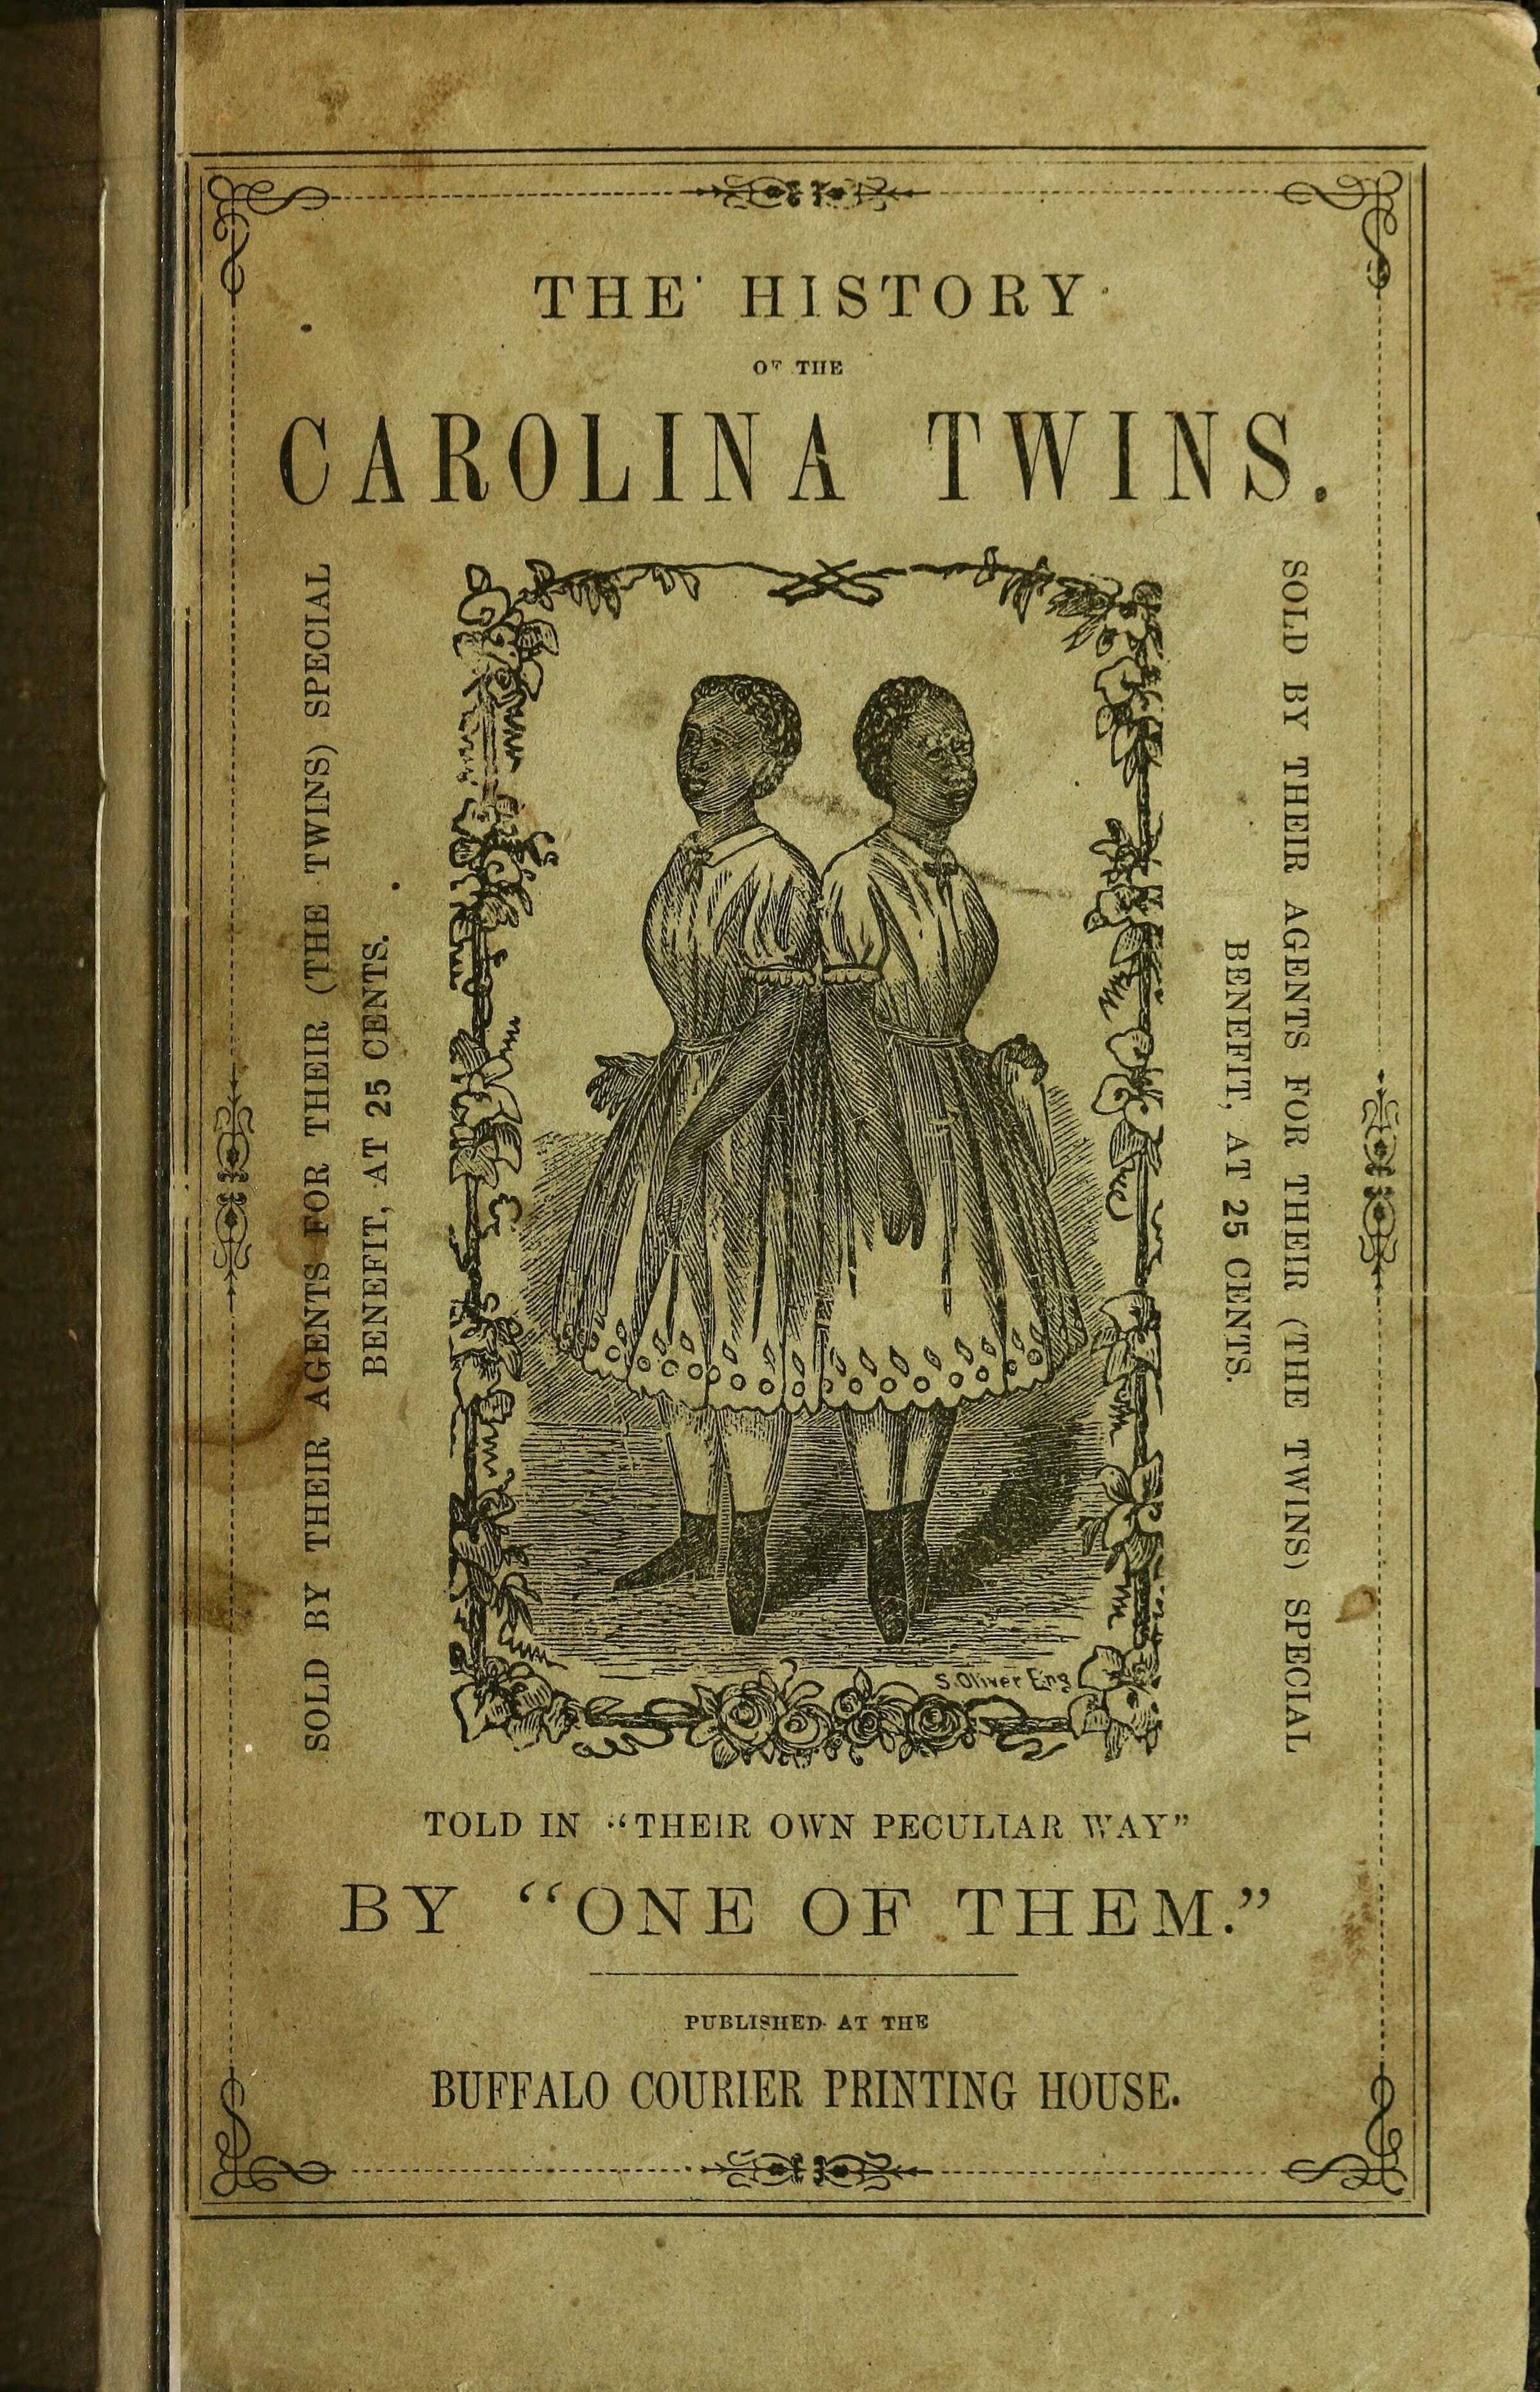 Cover of History of the Carolina Twins book